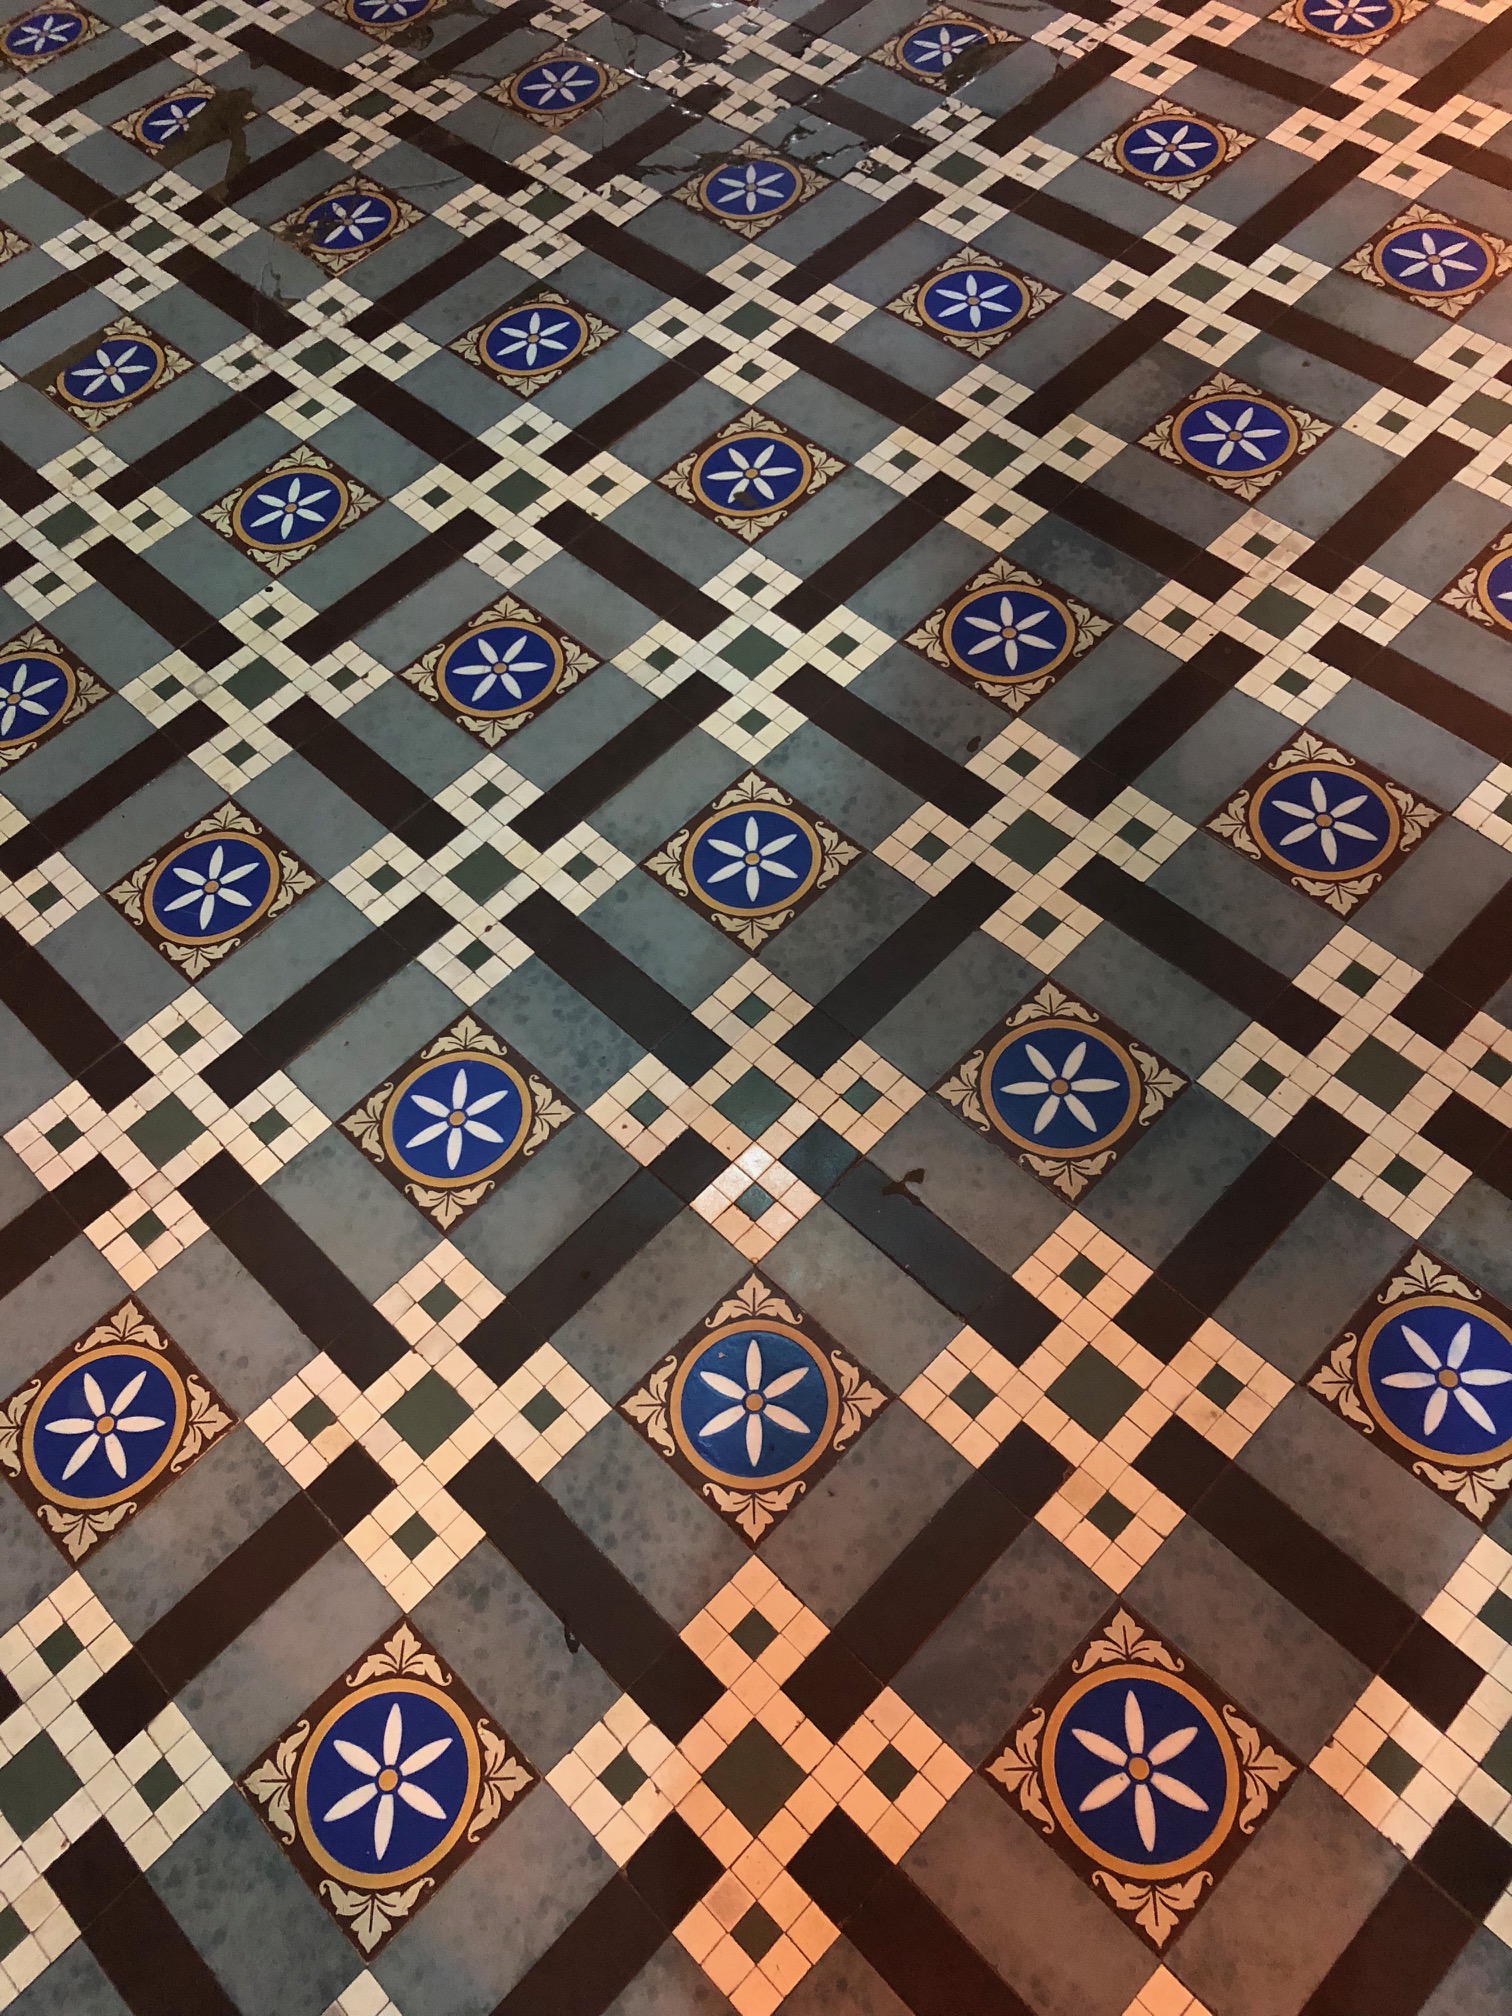 An intricate square pattern of floor tiles, including white six-petaled flowers on a blue background and small off-white tiles arranged in a heraldic knot.